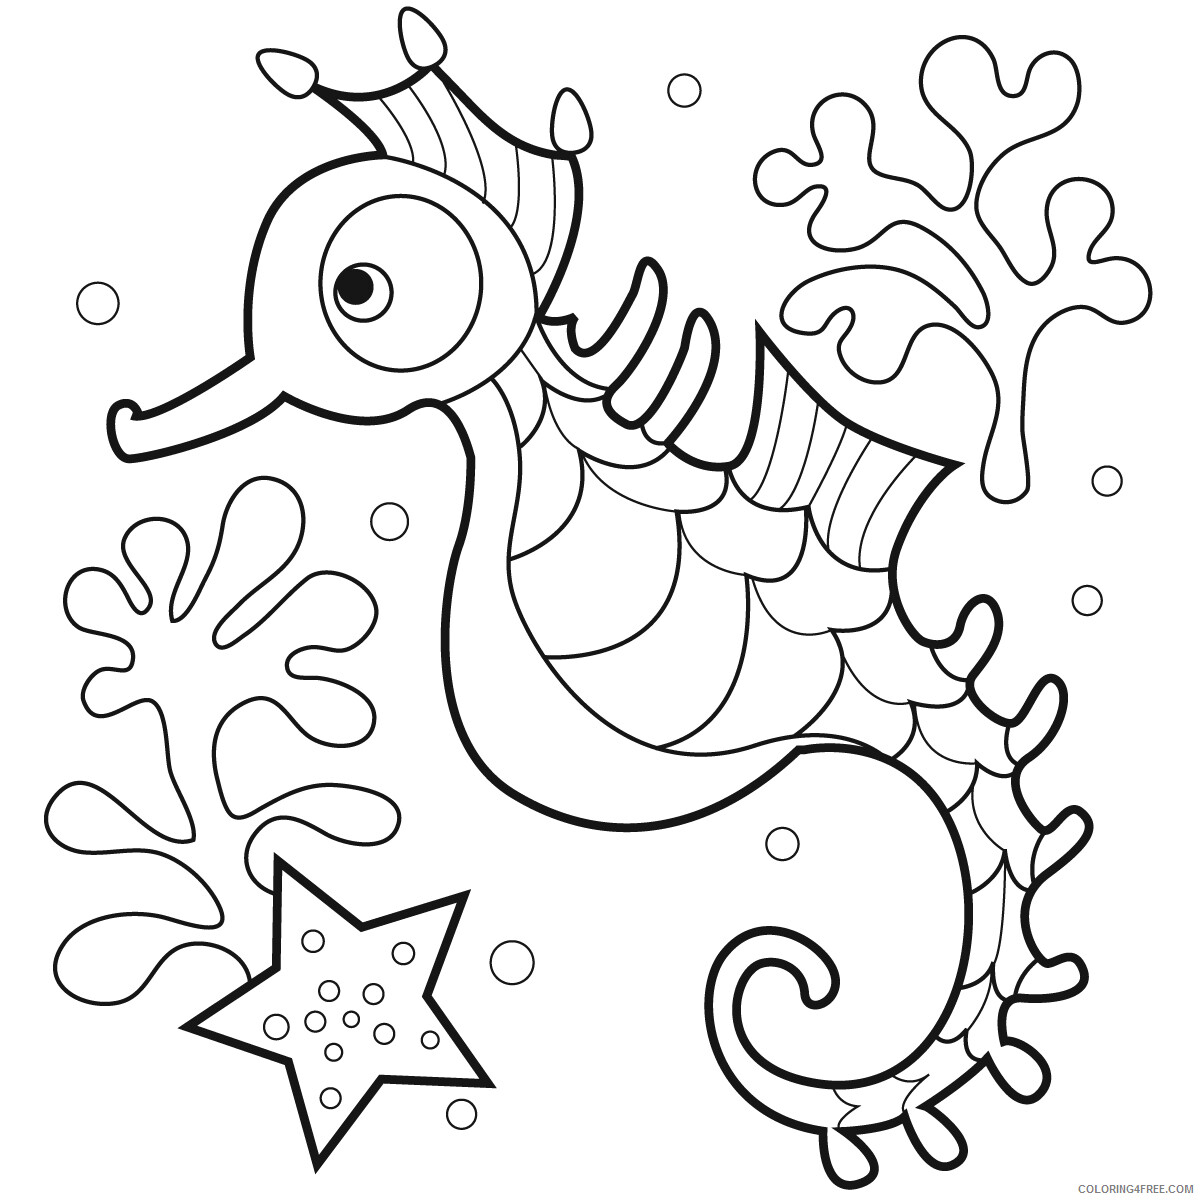 Seahorse Coloring Pages Animal Printable Sheets Seahorse To Print 2021 4403 Coloring4free